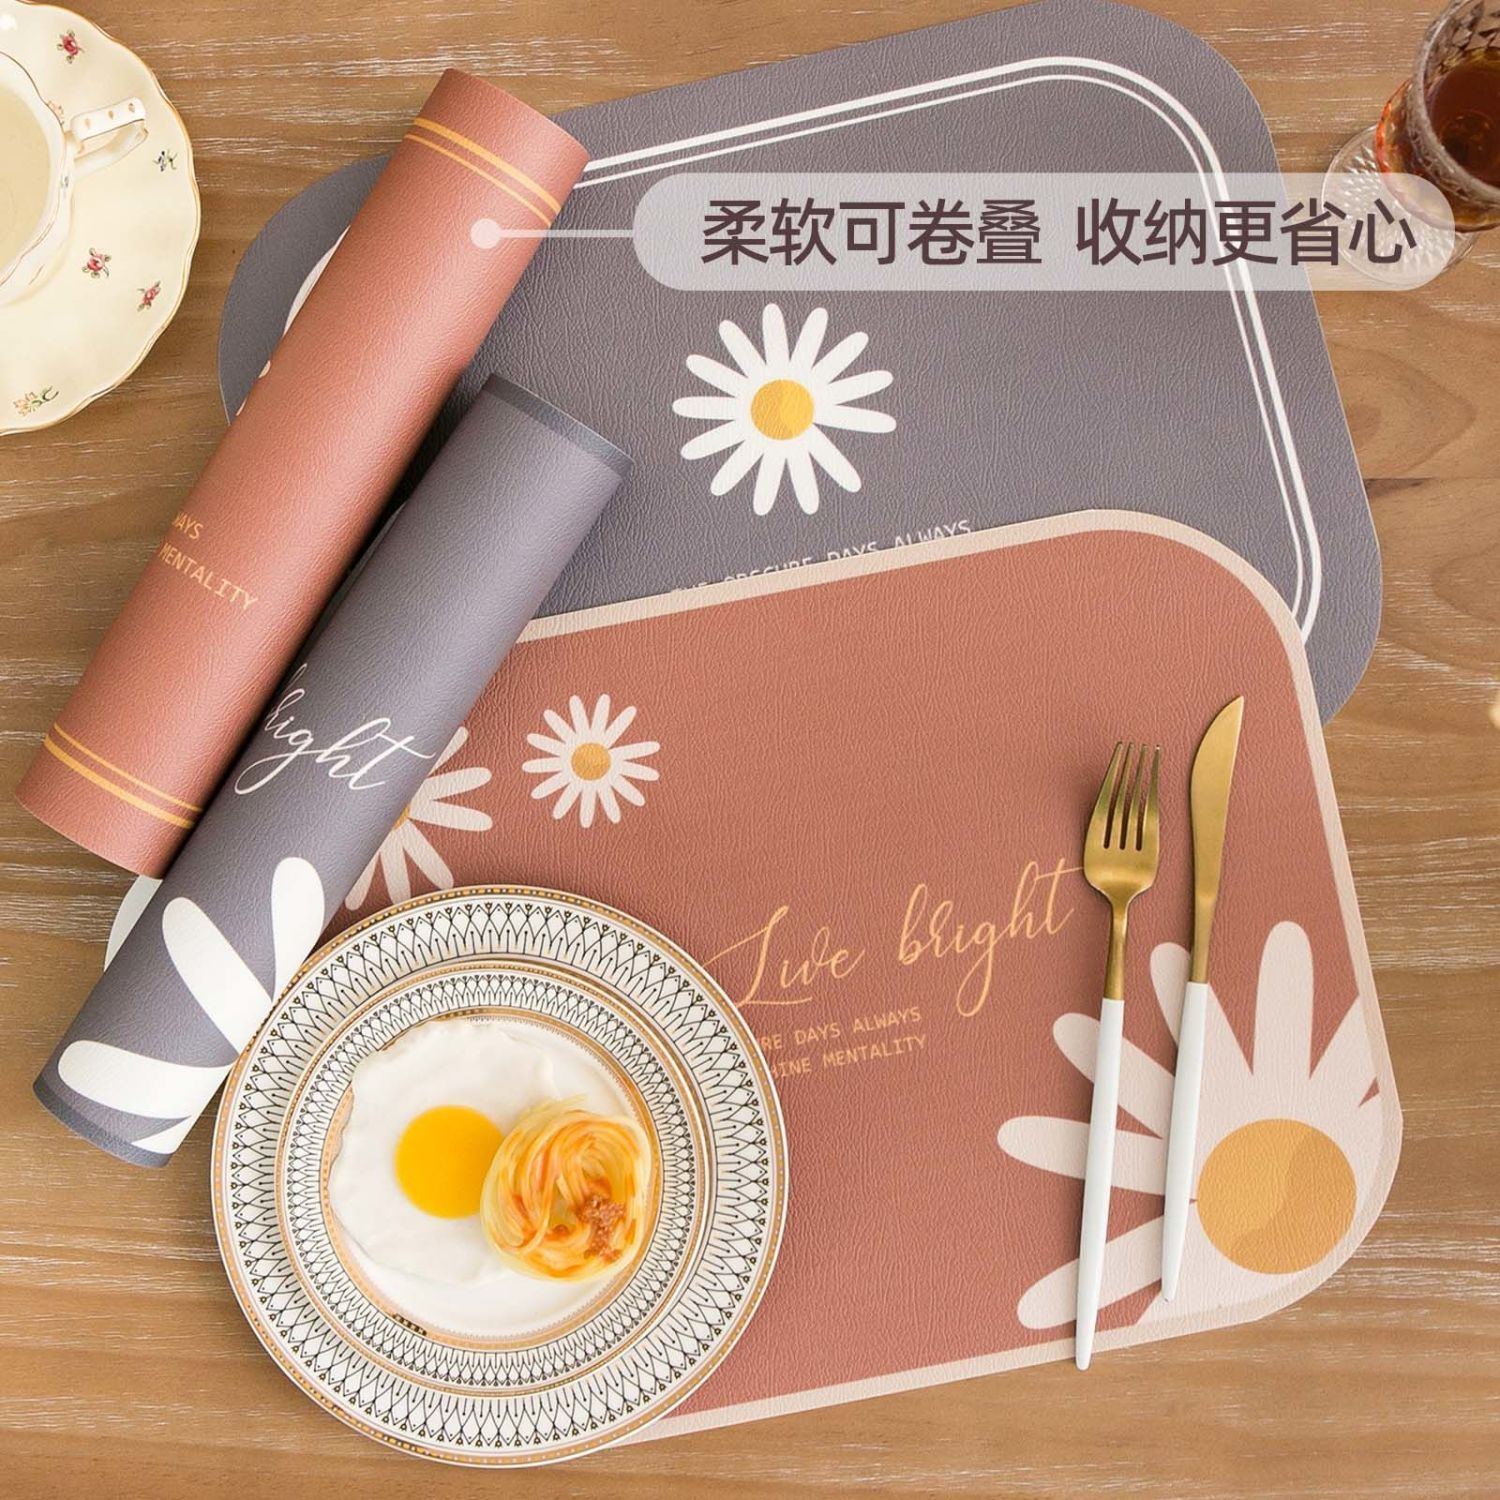 2022 leather dining mat waterproof oil proof bowl mat thermal insulation table mat American light luxury Western dish mat cup mat can be customized